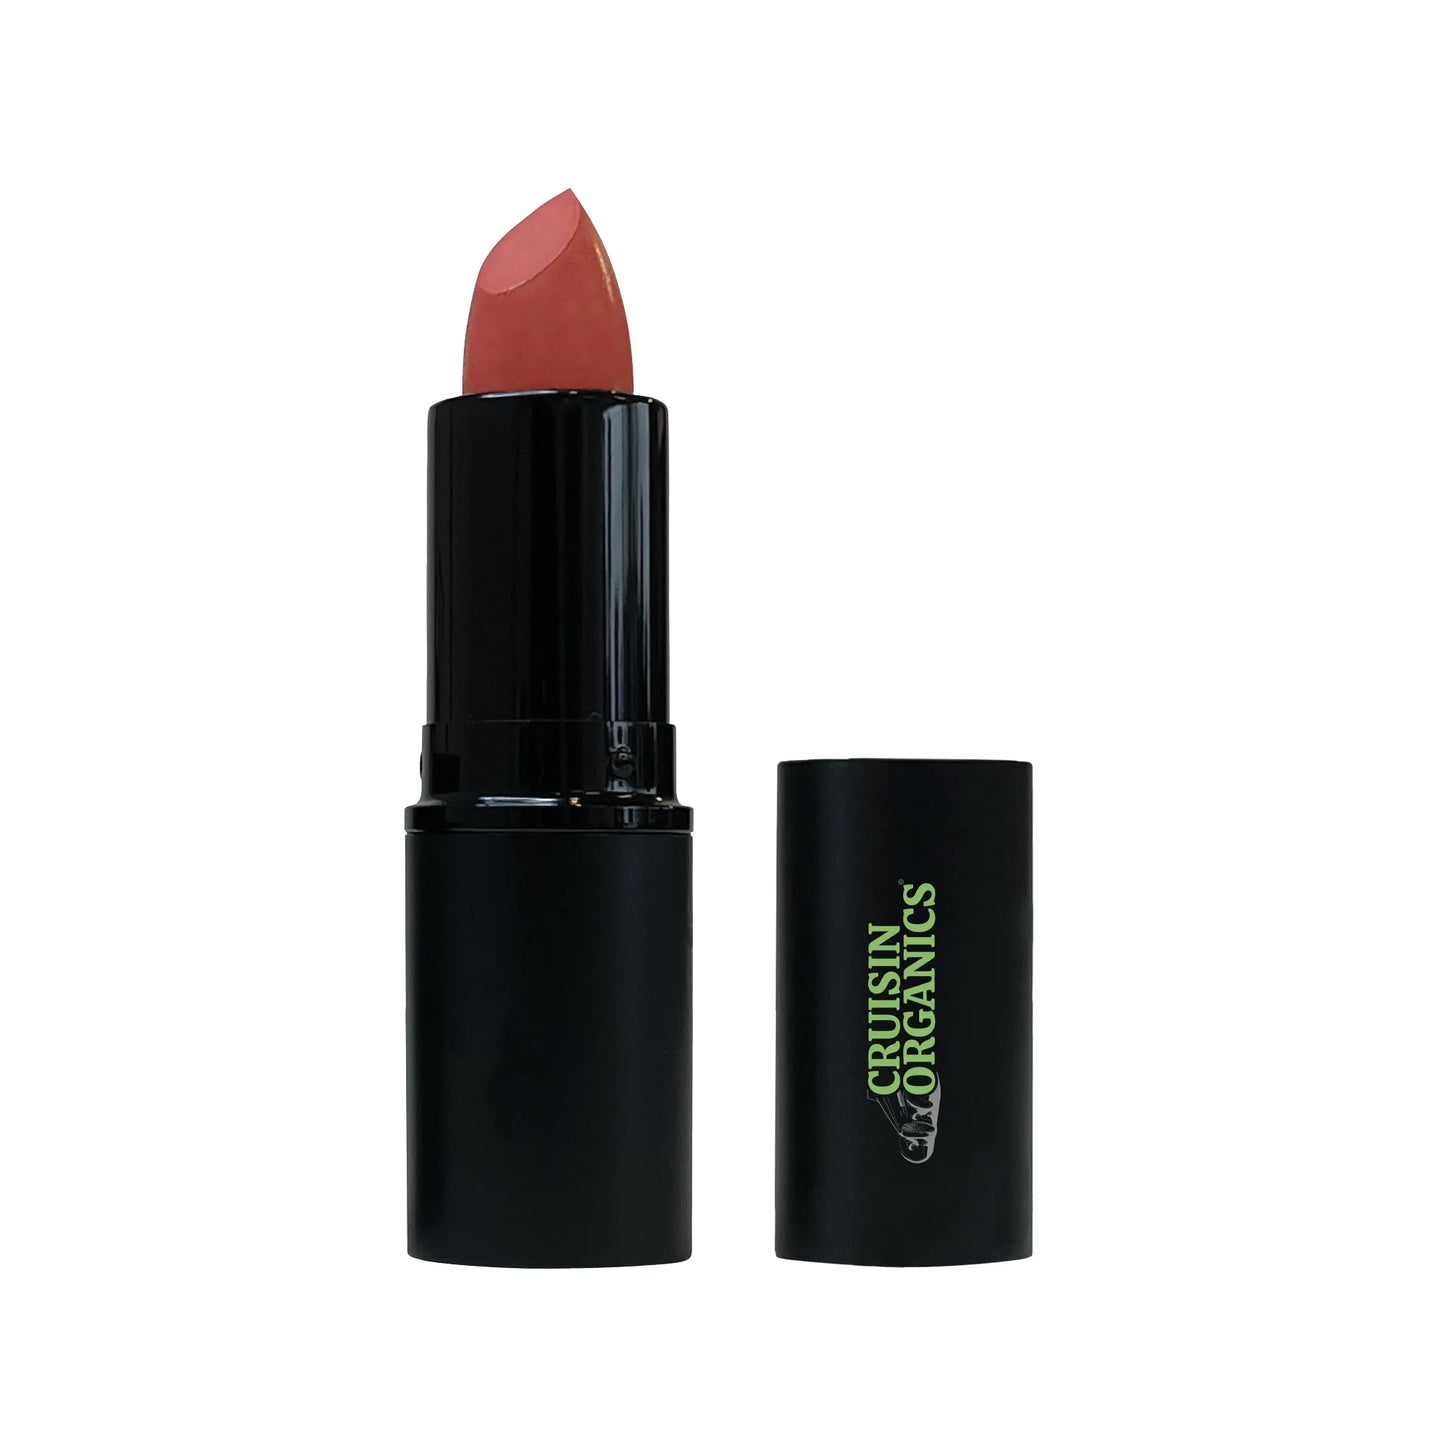 Protect your lips from UV sun rays with Cruisin Organics Simply Mauve Lipstick. Made with natural beeswax, pigments, jojoba and castor seed oils, it gives your lips a lush and bistro color.